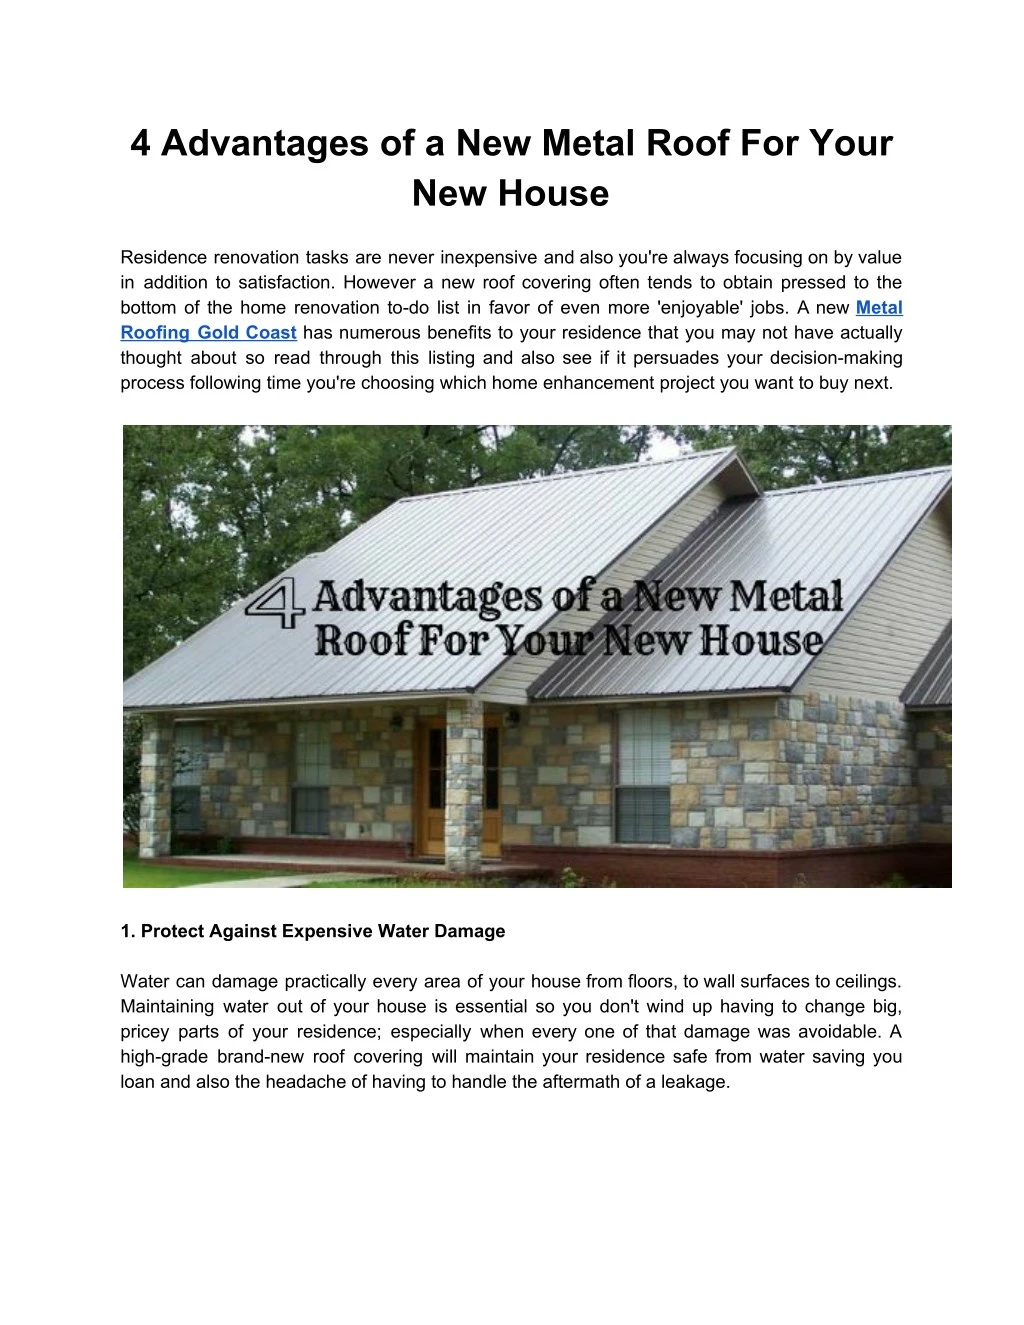 4 advantages of a new metal roof for your